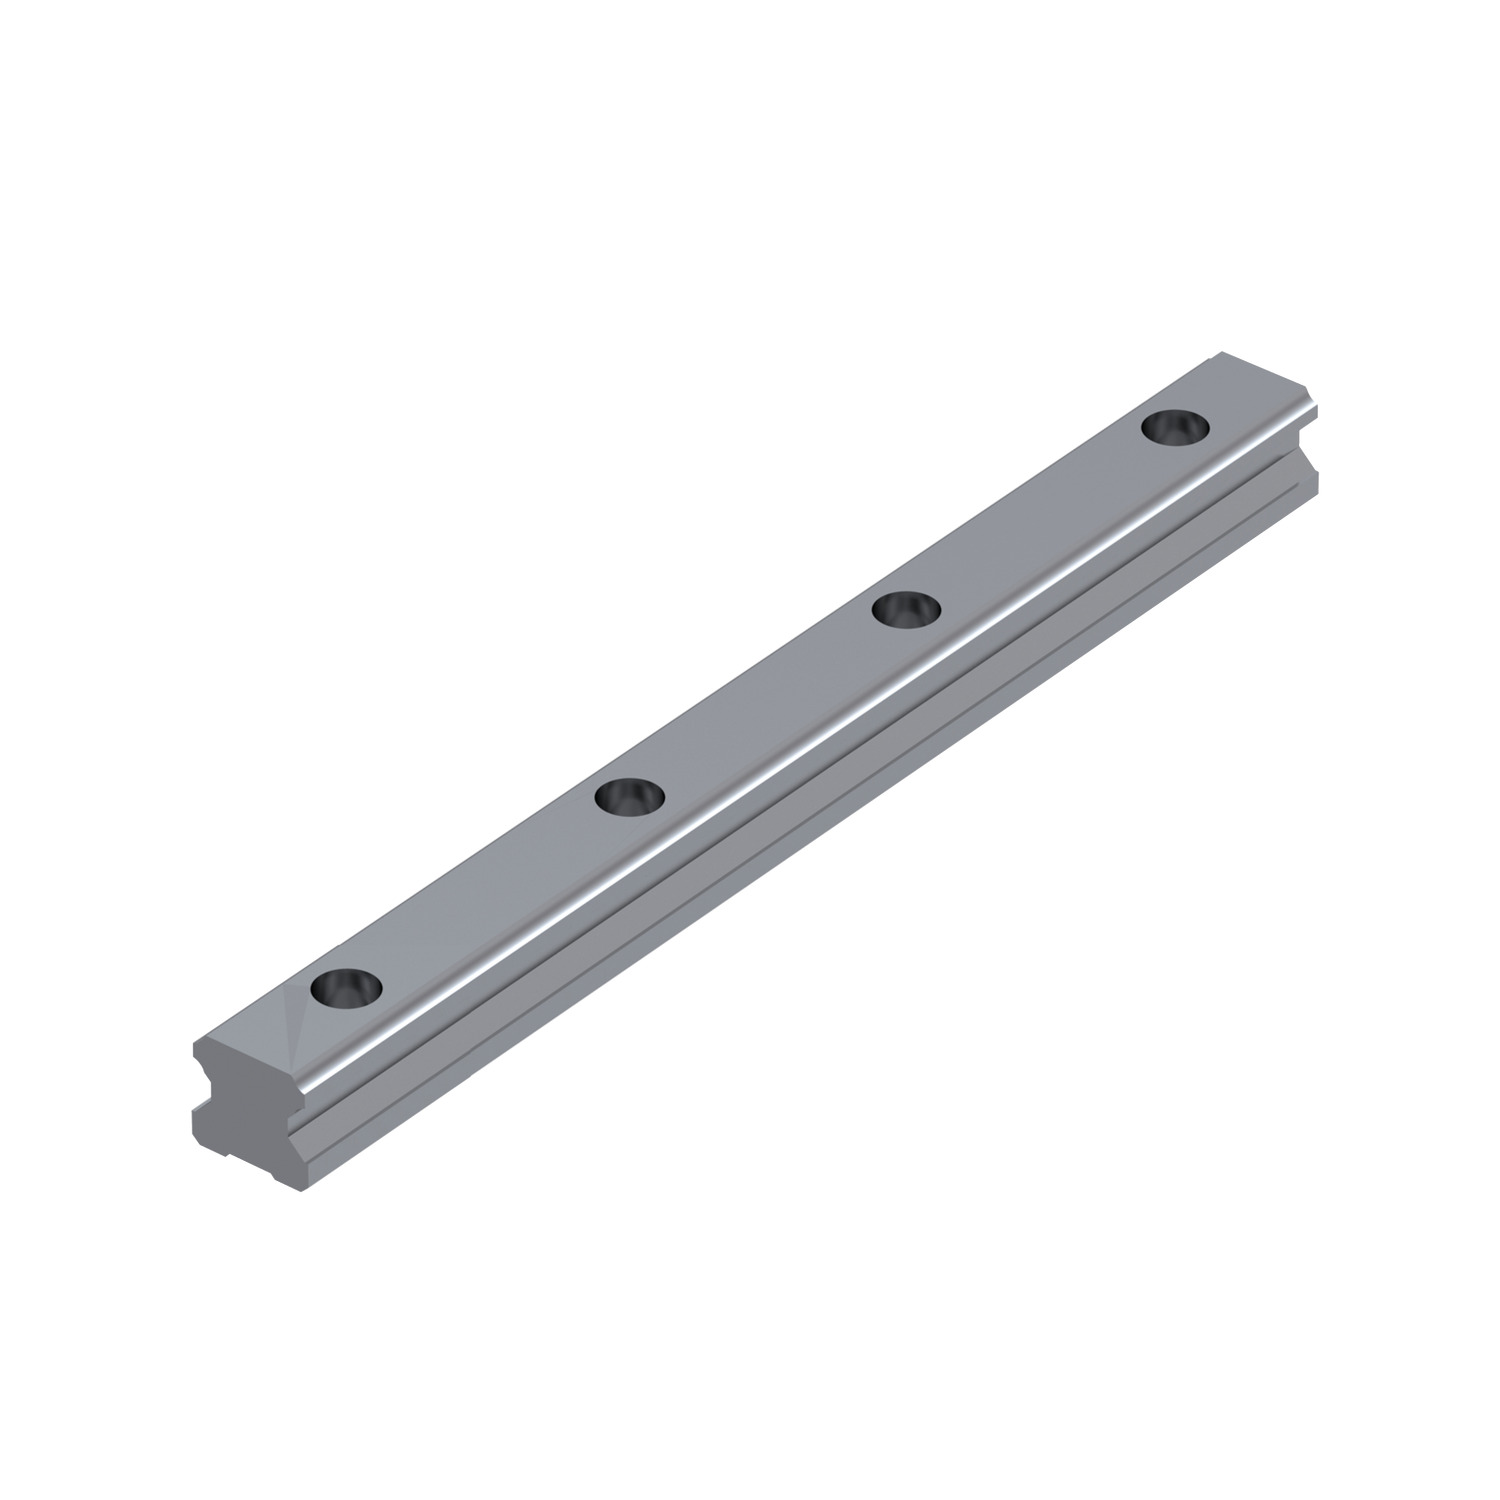 L1016.20-3400 Linear guide rail 20mm 3400 Hardened and ground steel. EC:20163648 WG:05063055289788